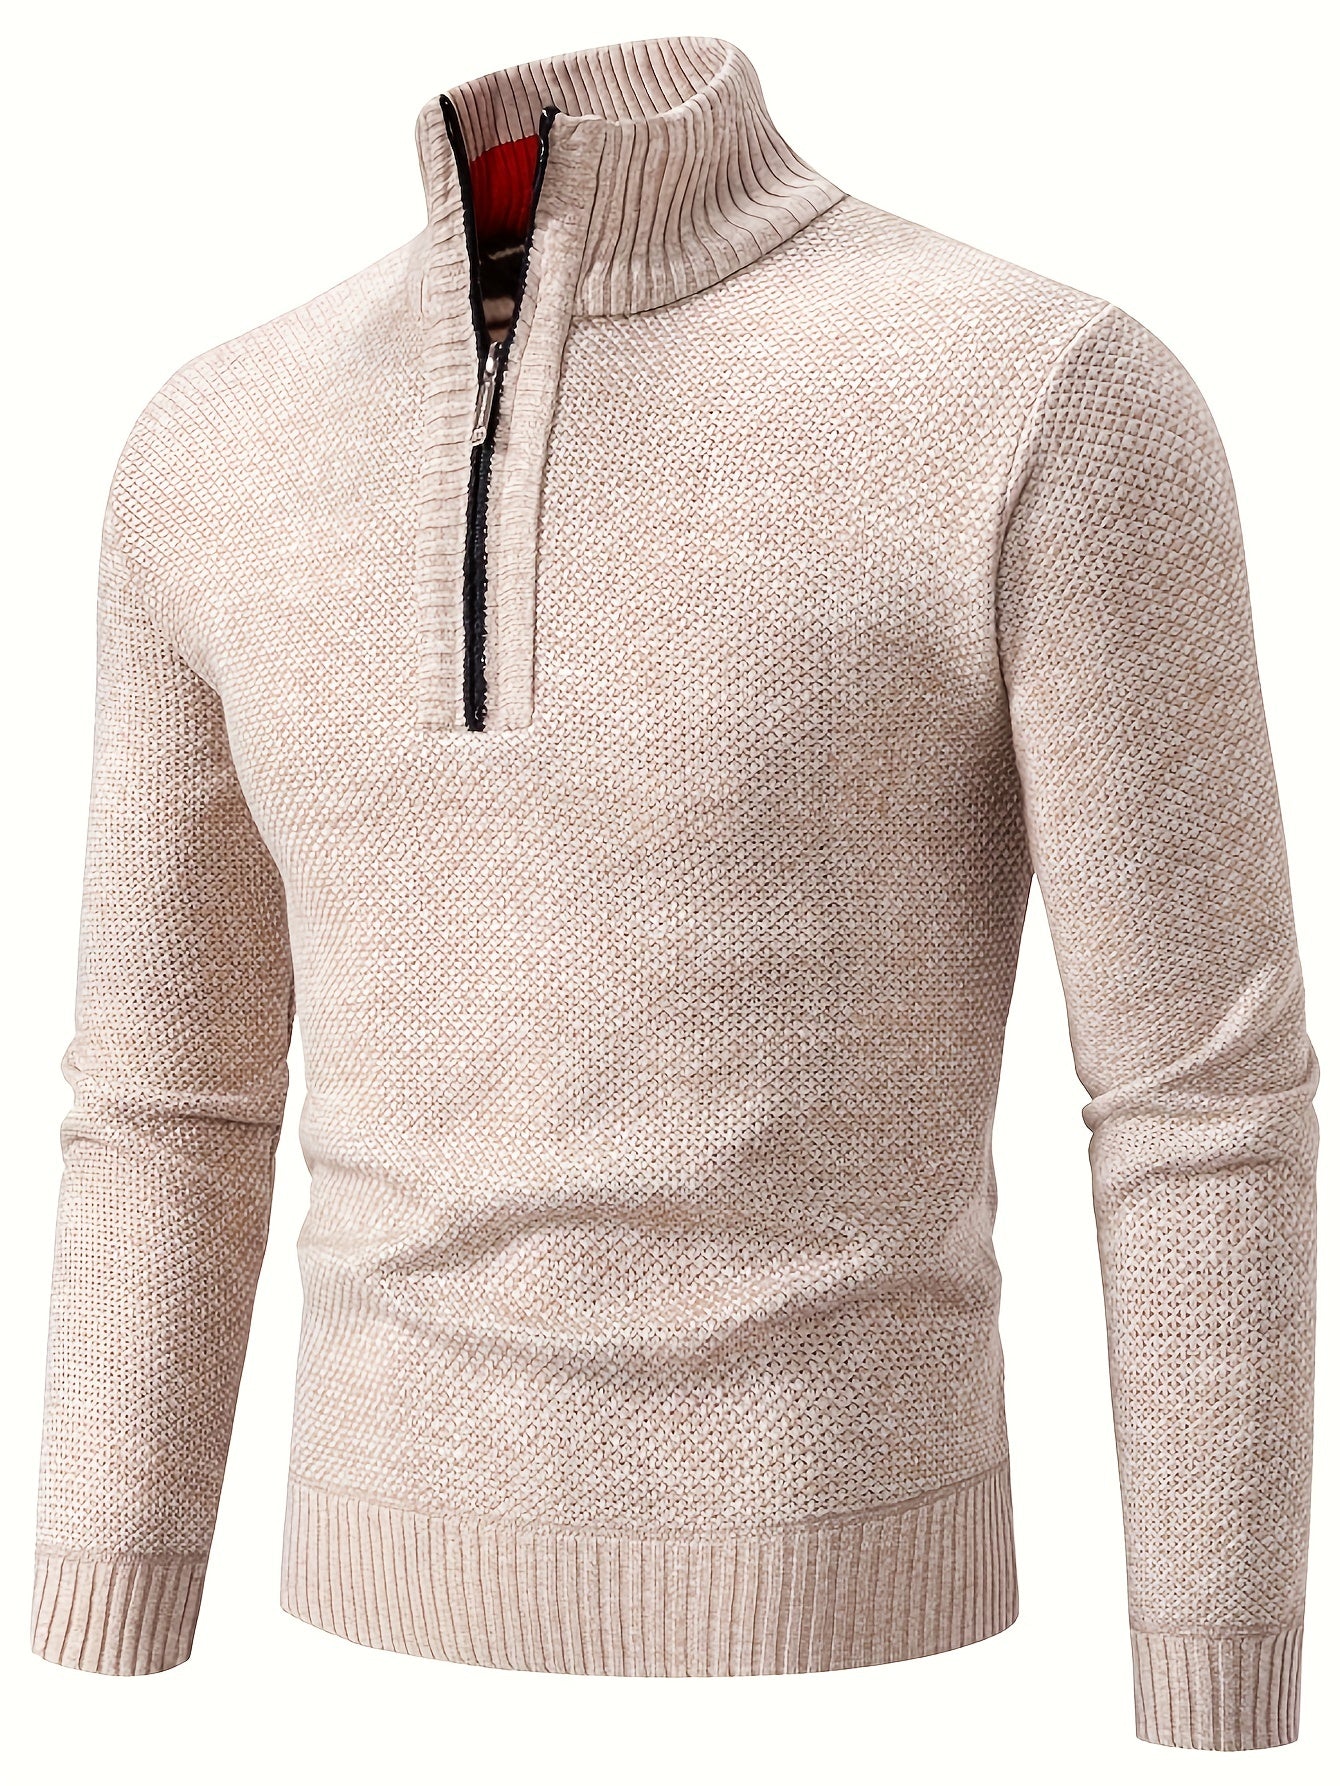 Men's Trendy Solid Knitted Pullover, Casual Slightly Stretch Breathable Turtle Neck Zip Up Long Sleeve Top For Outdoor Fall Winter